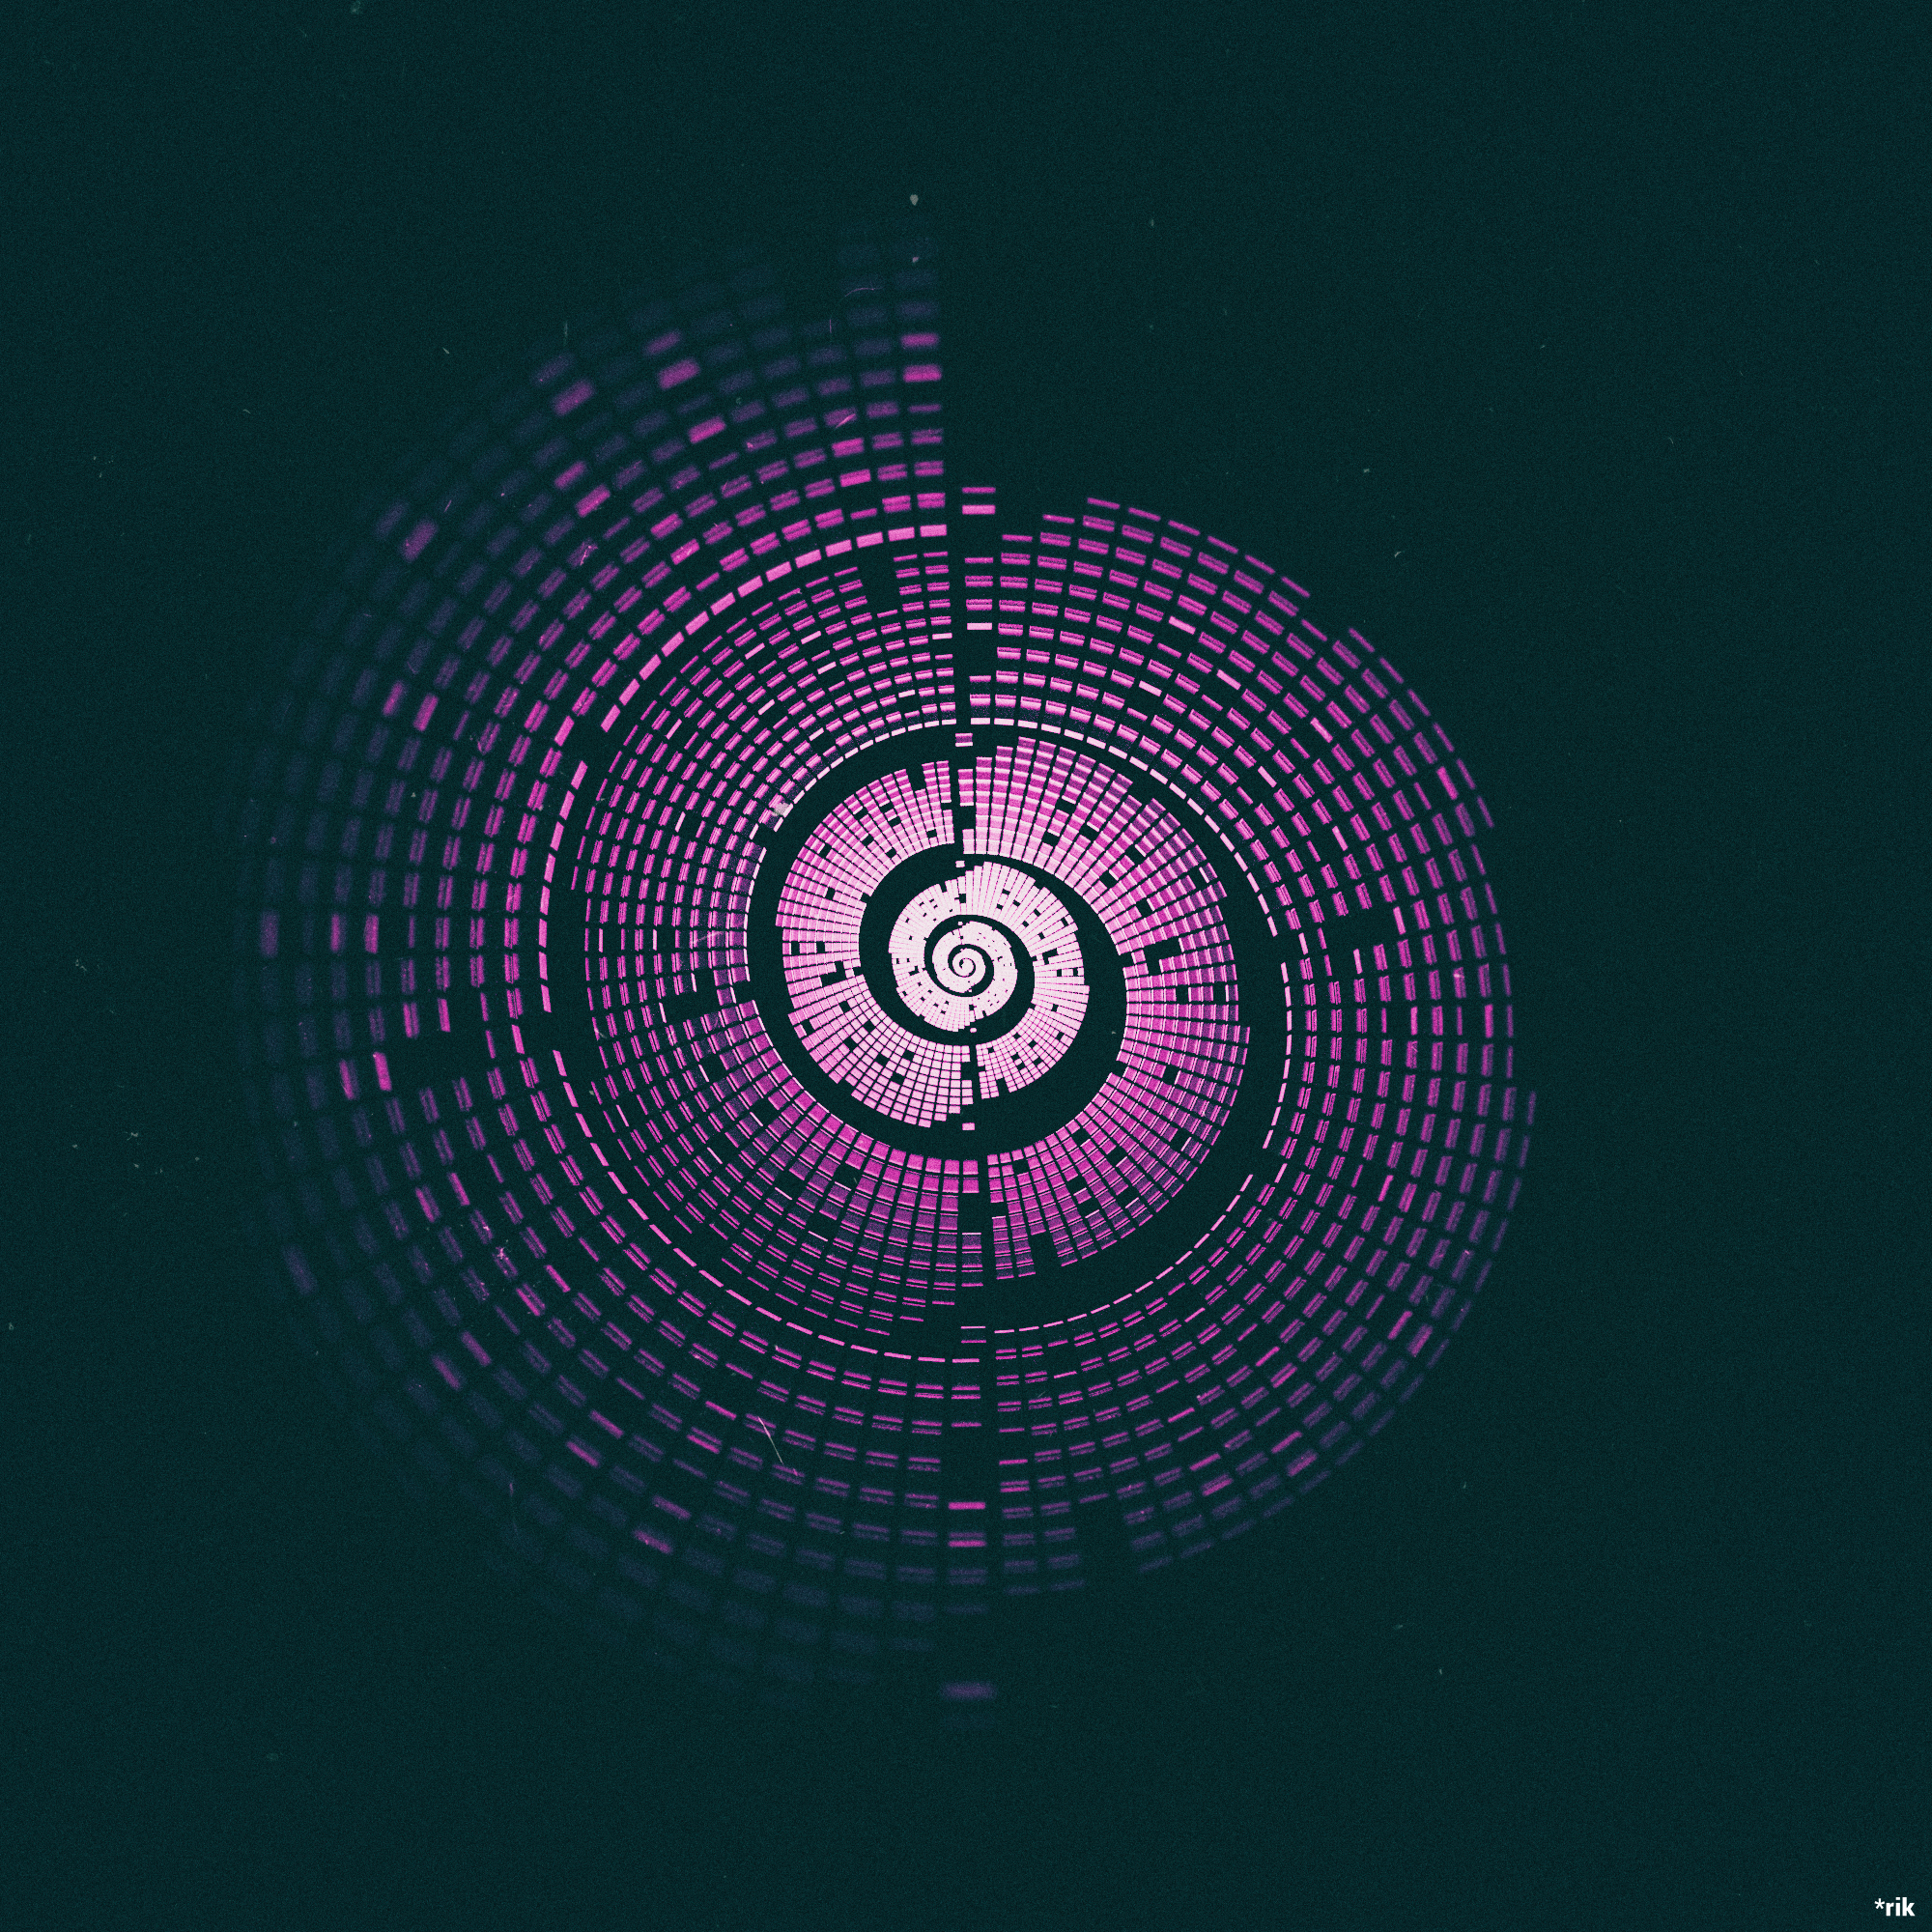 New Lock Screen Wallpapers violet, abstract, fractal, purple, spiral